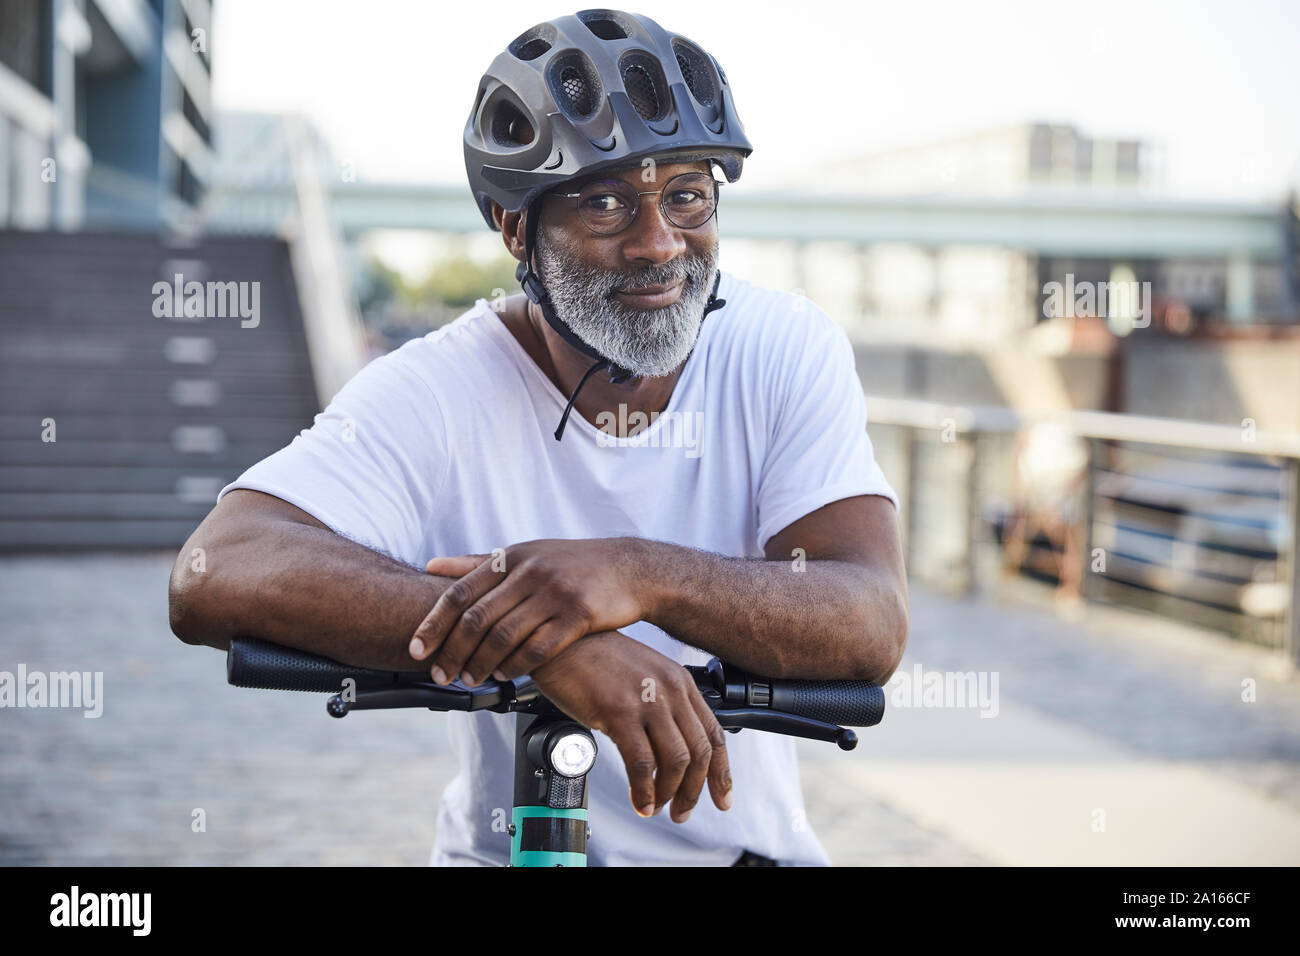 Portrait of smiling mature man wearing cycling helmet leaning on handlebar of Electric Scooter Stock Photo